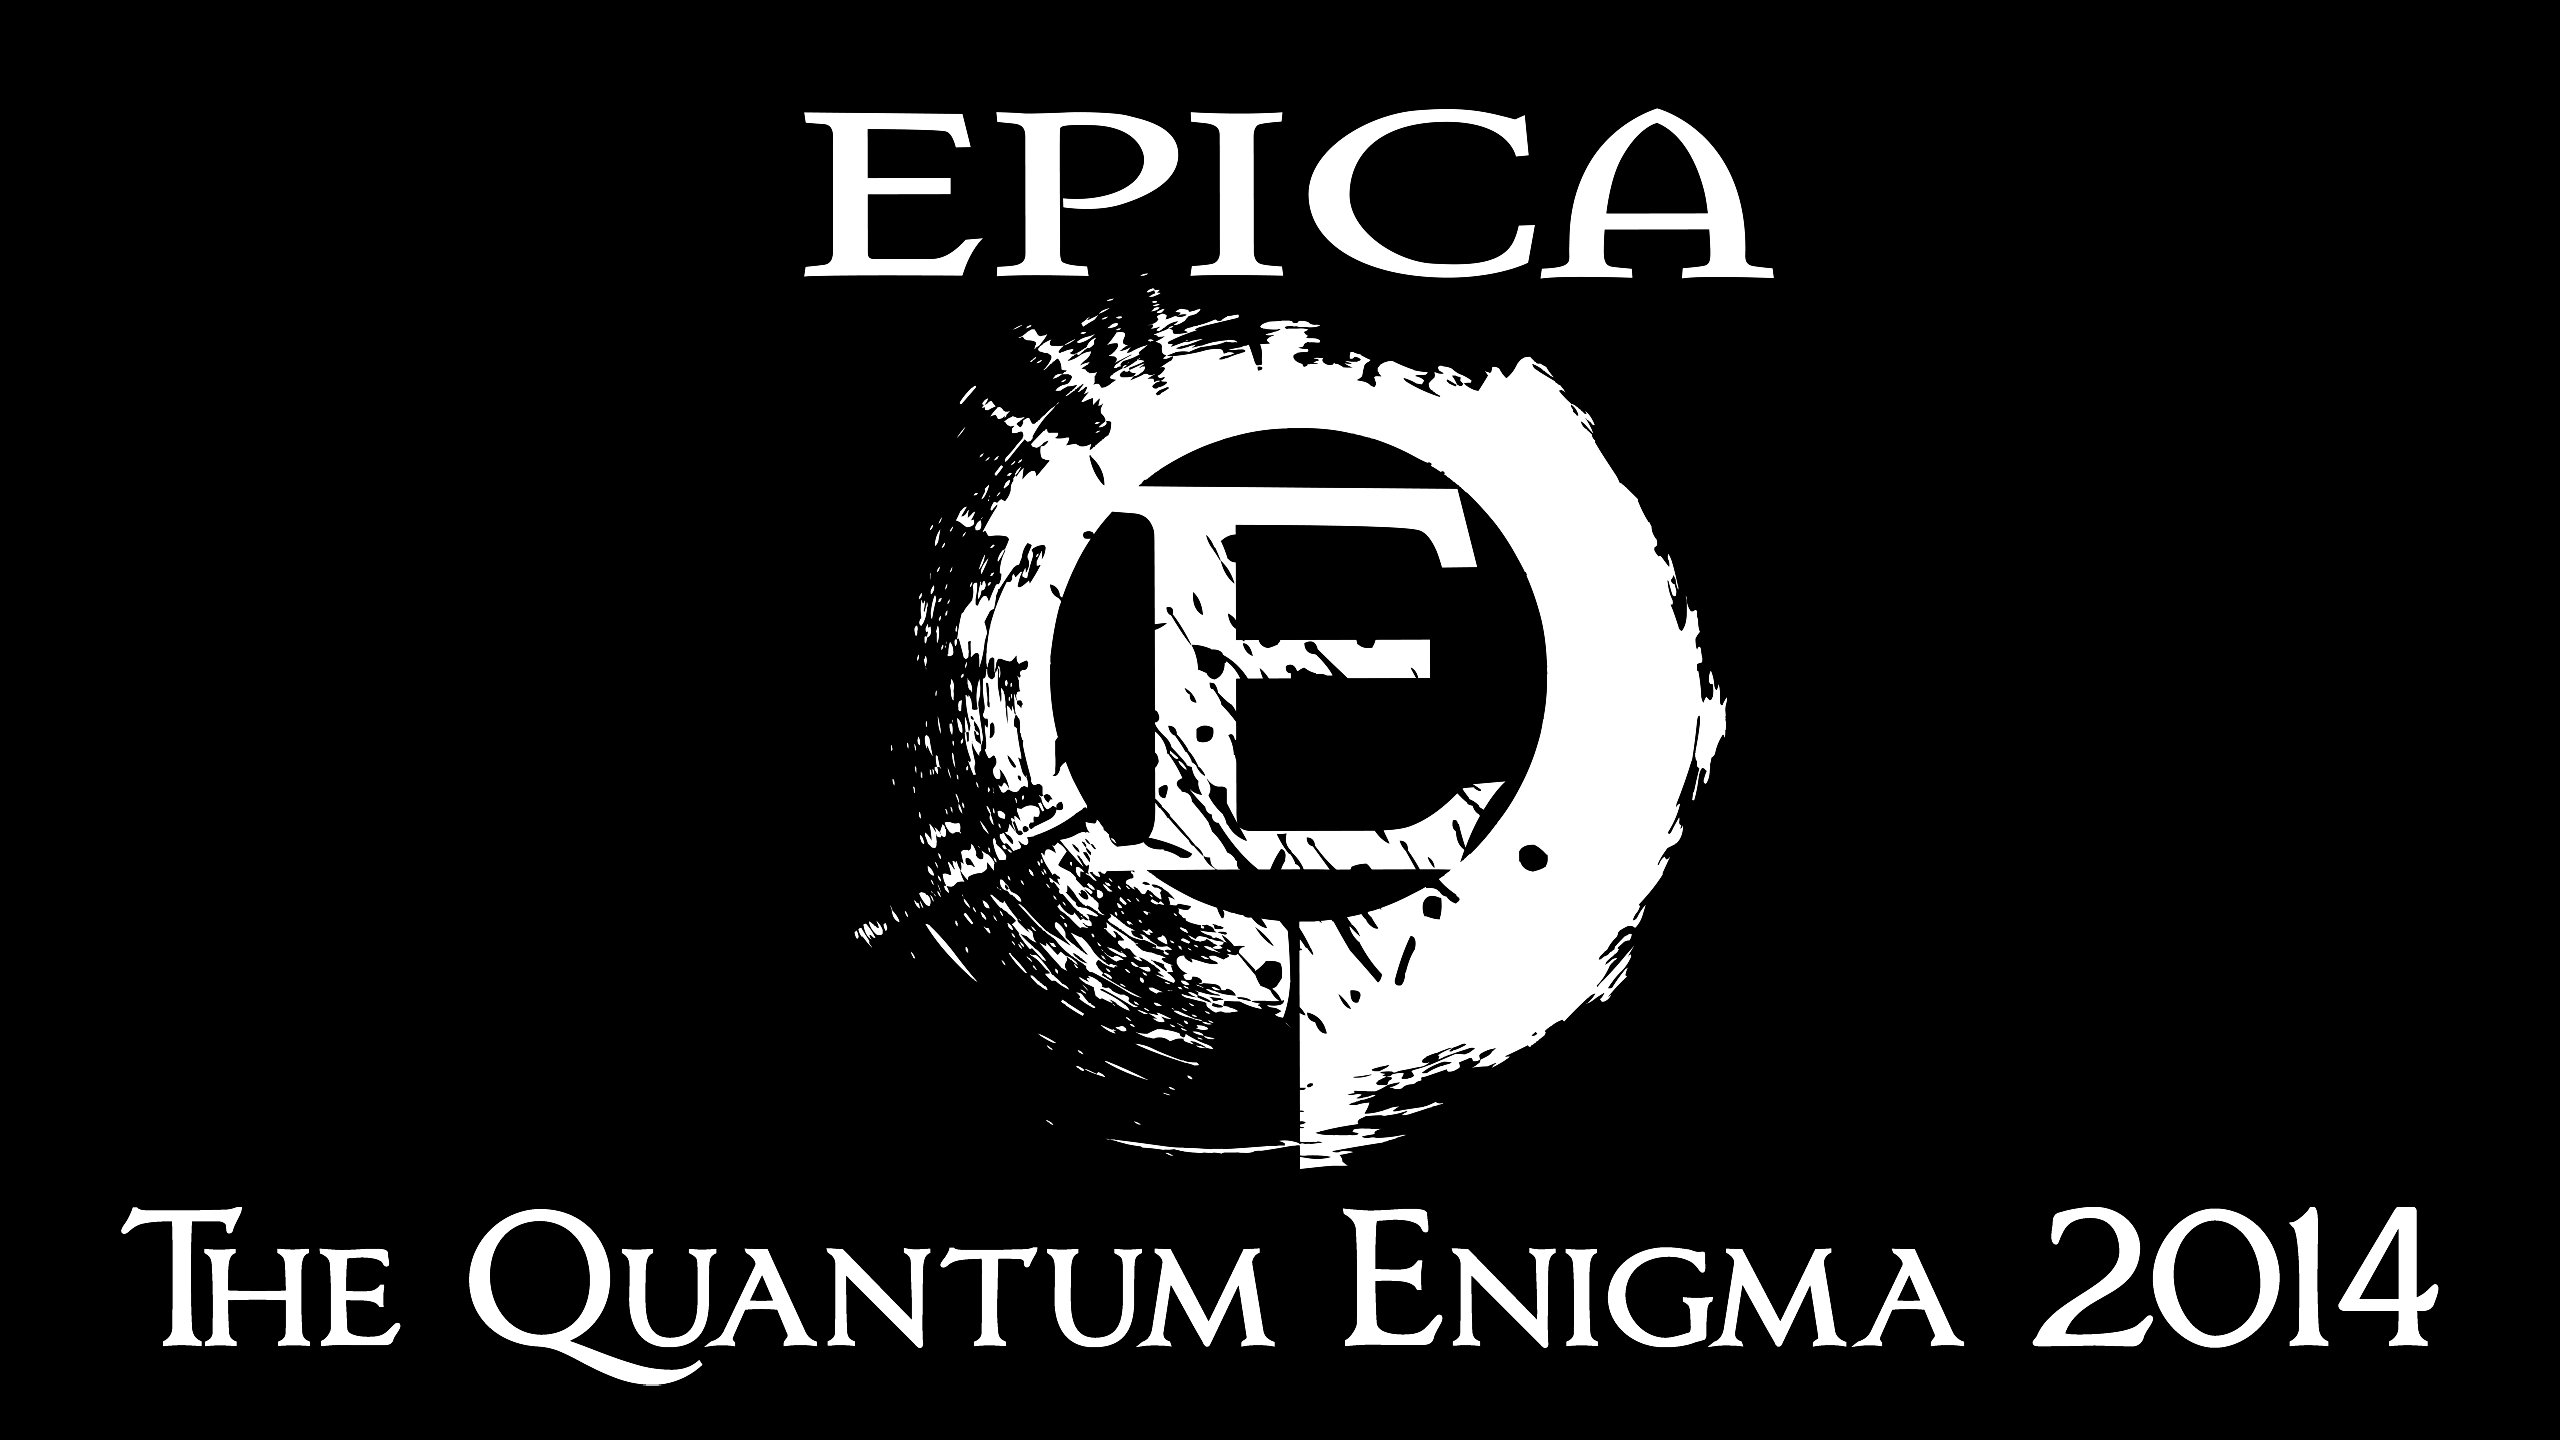 Largs Wallpaper on Twitter NEW WALLPAPER EPICA  THE QUANTUM ENIGMA  LargsWall httpstcoEw9gyZvd5v httpstcoPuF2oBPbte  X